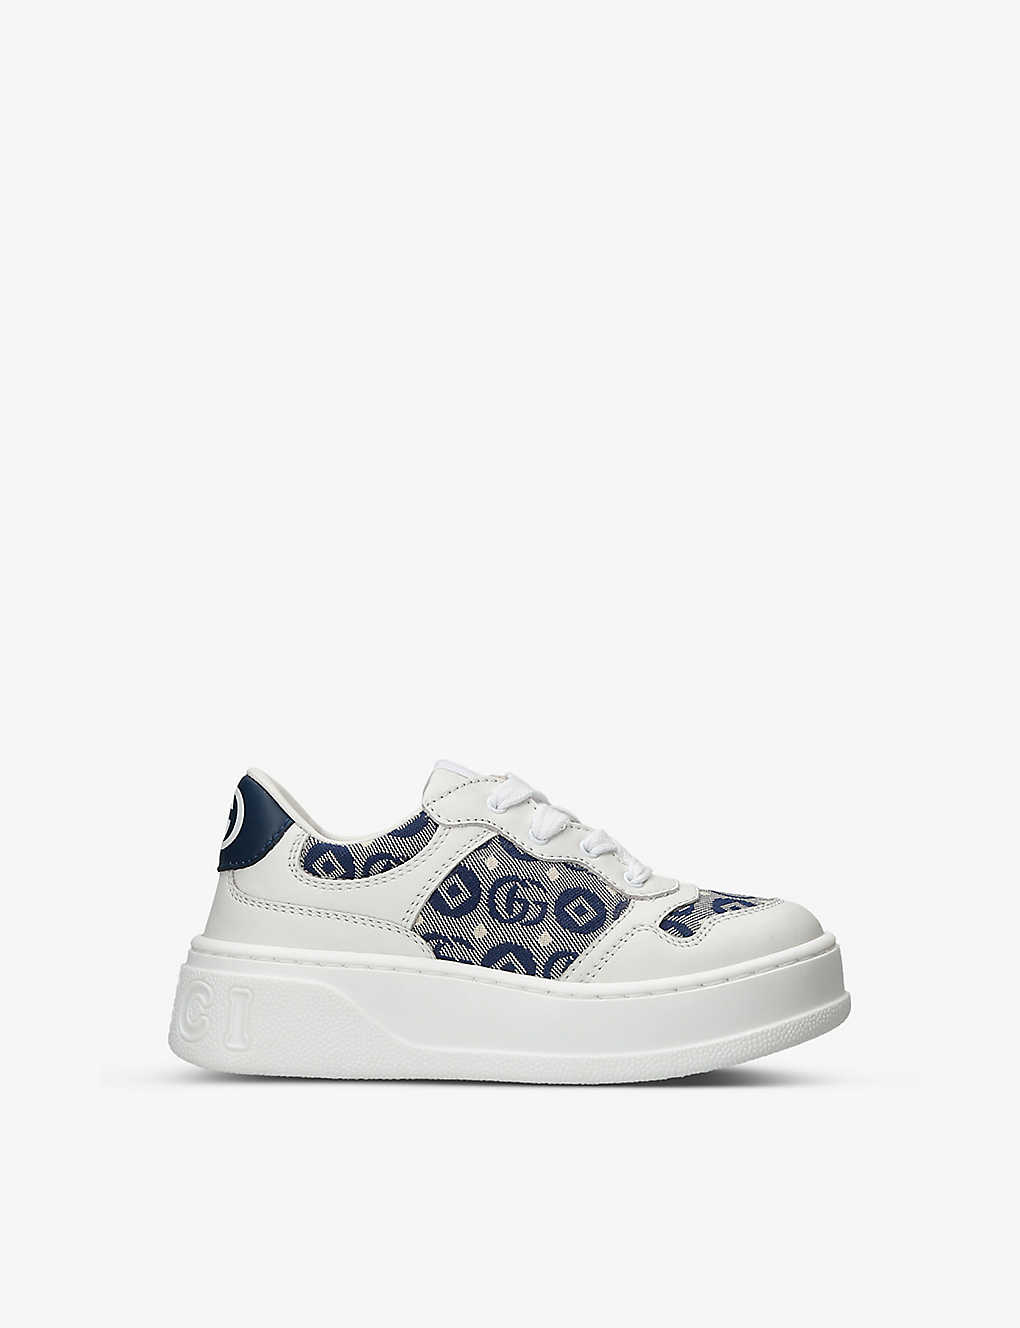 Gucci Kids' Chunky B Leather Trainers 6 Months - 5 Years In White/navy